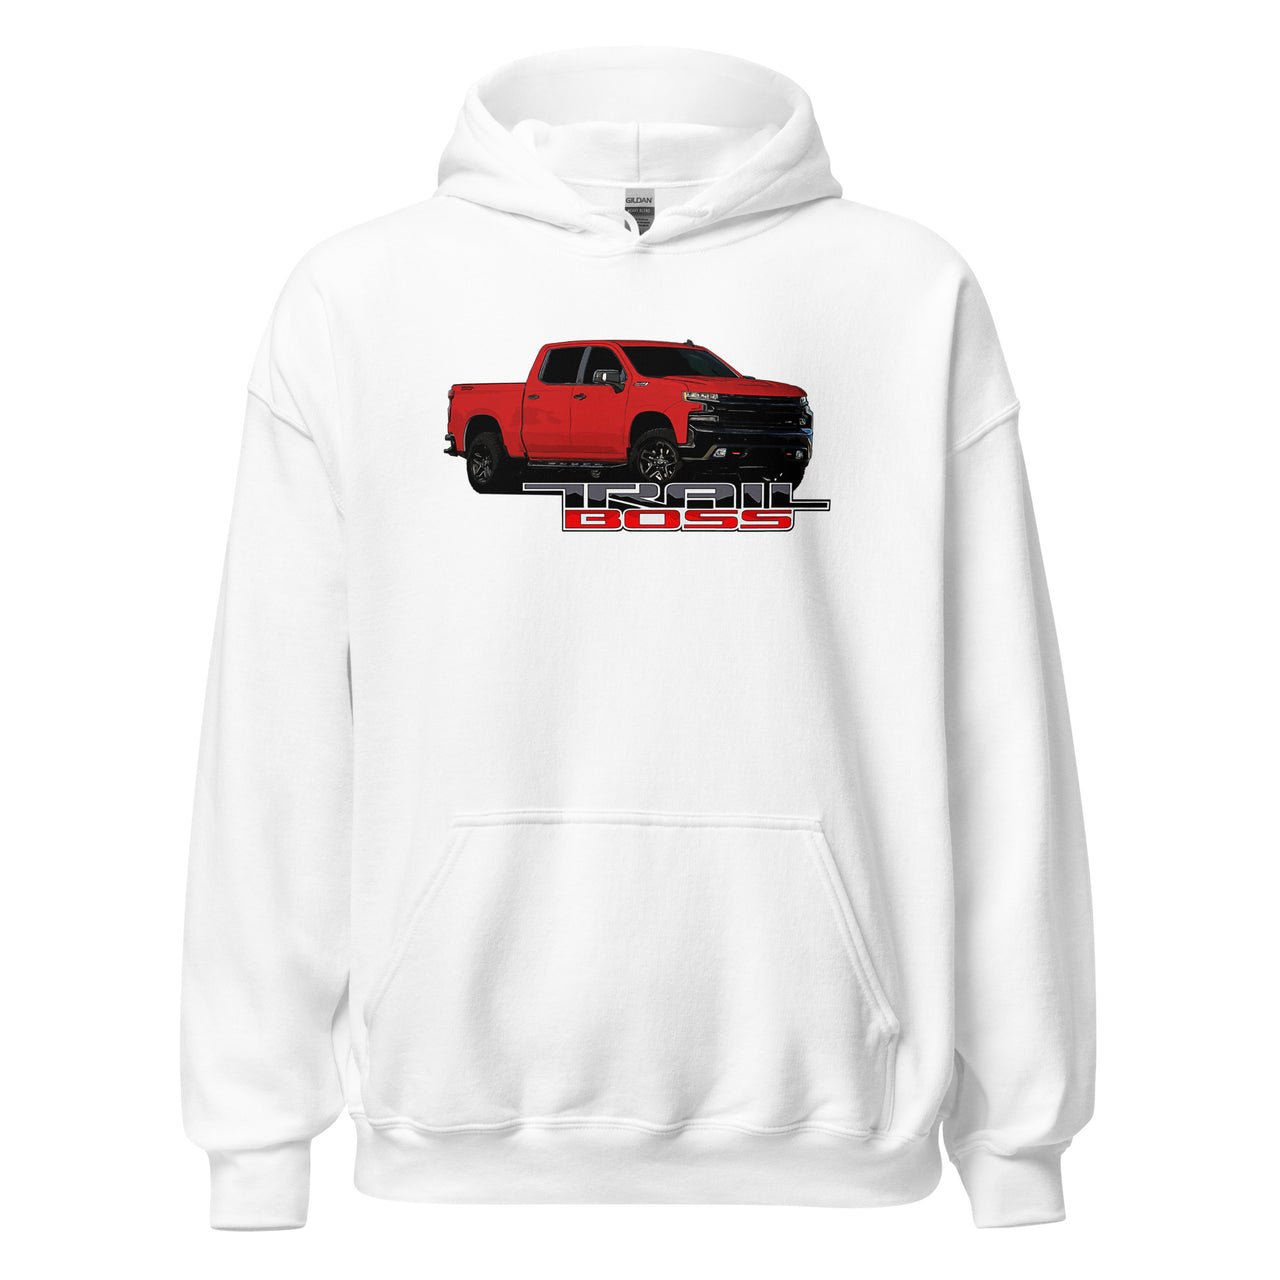 Red Trail Boss Truck Hoodie in white